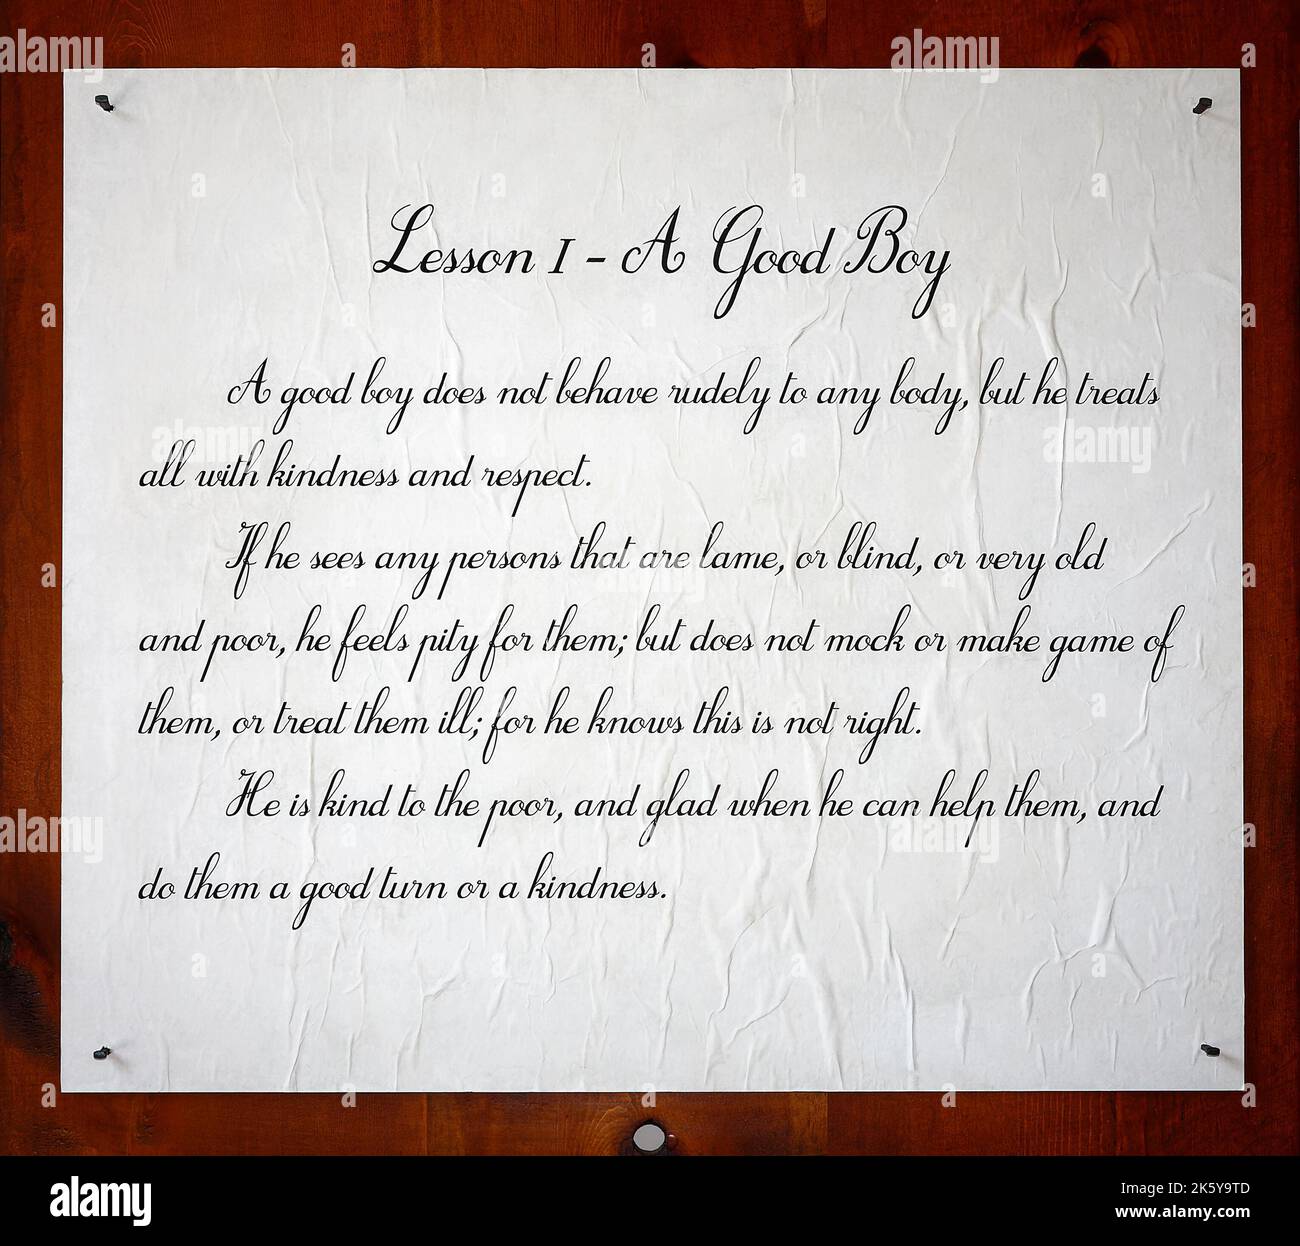 plaque, Lesson 1 - A Good Boy, paper on wood, antique, old saying, text, words, Hagley Museum, Delaware, Wilmington, DE Stock Photo